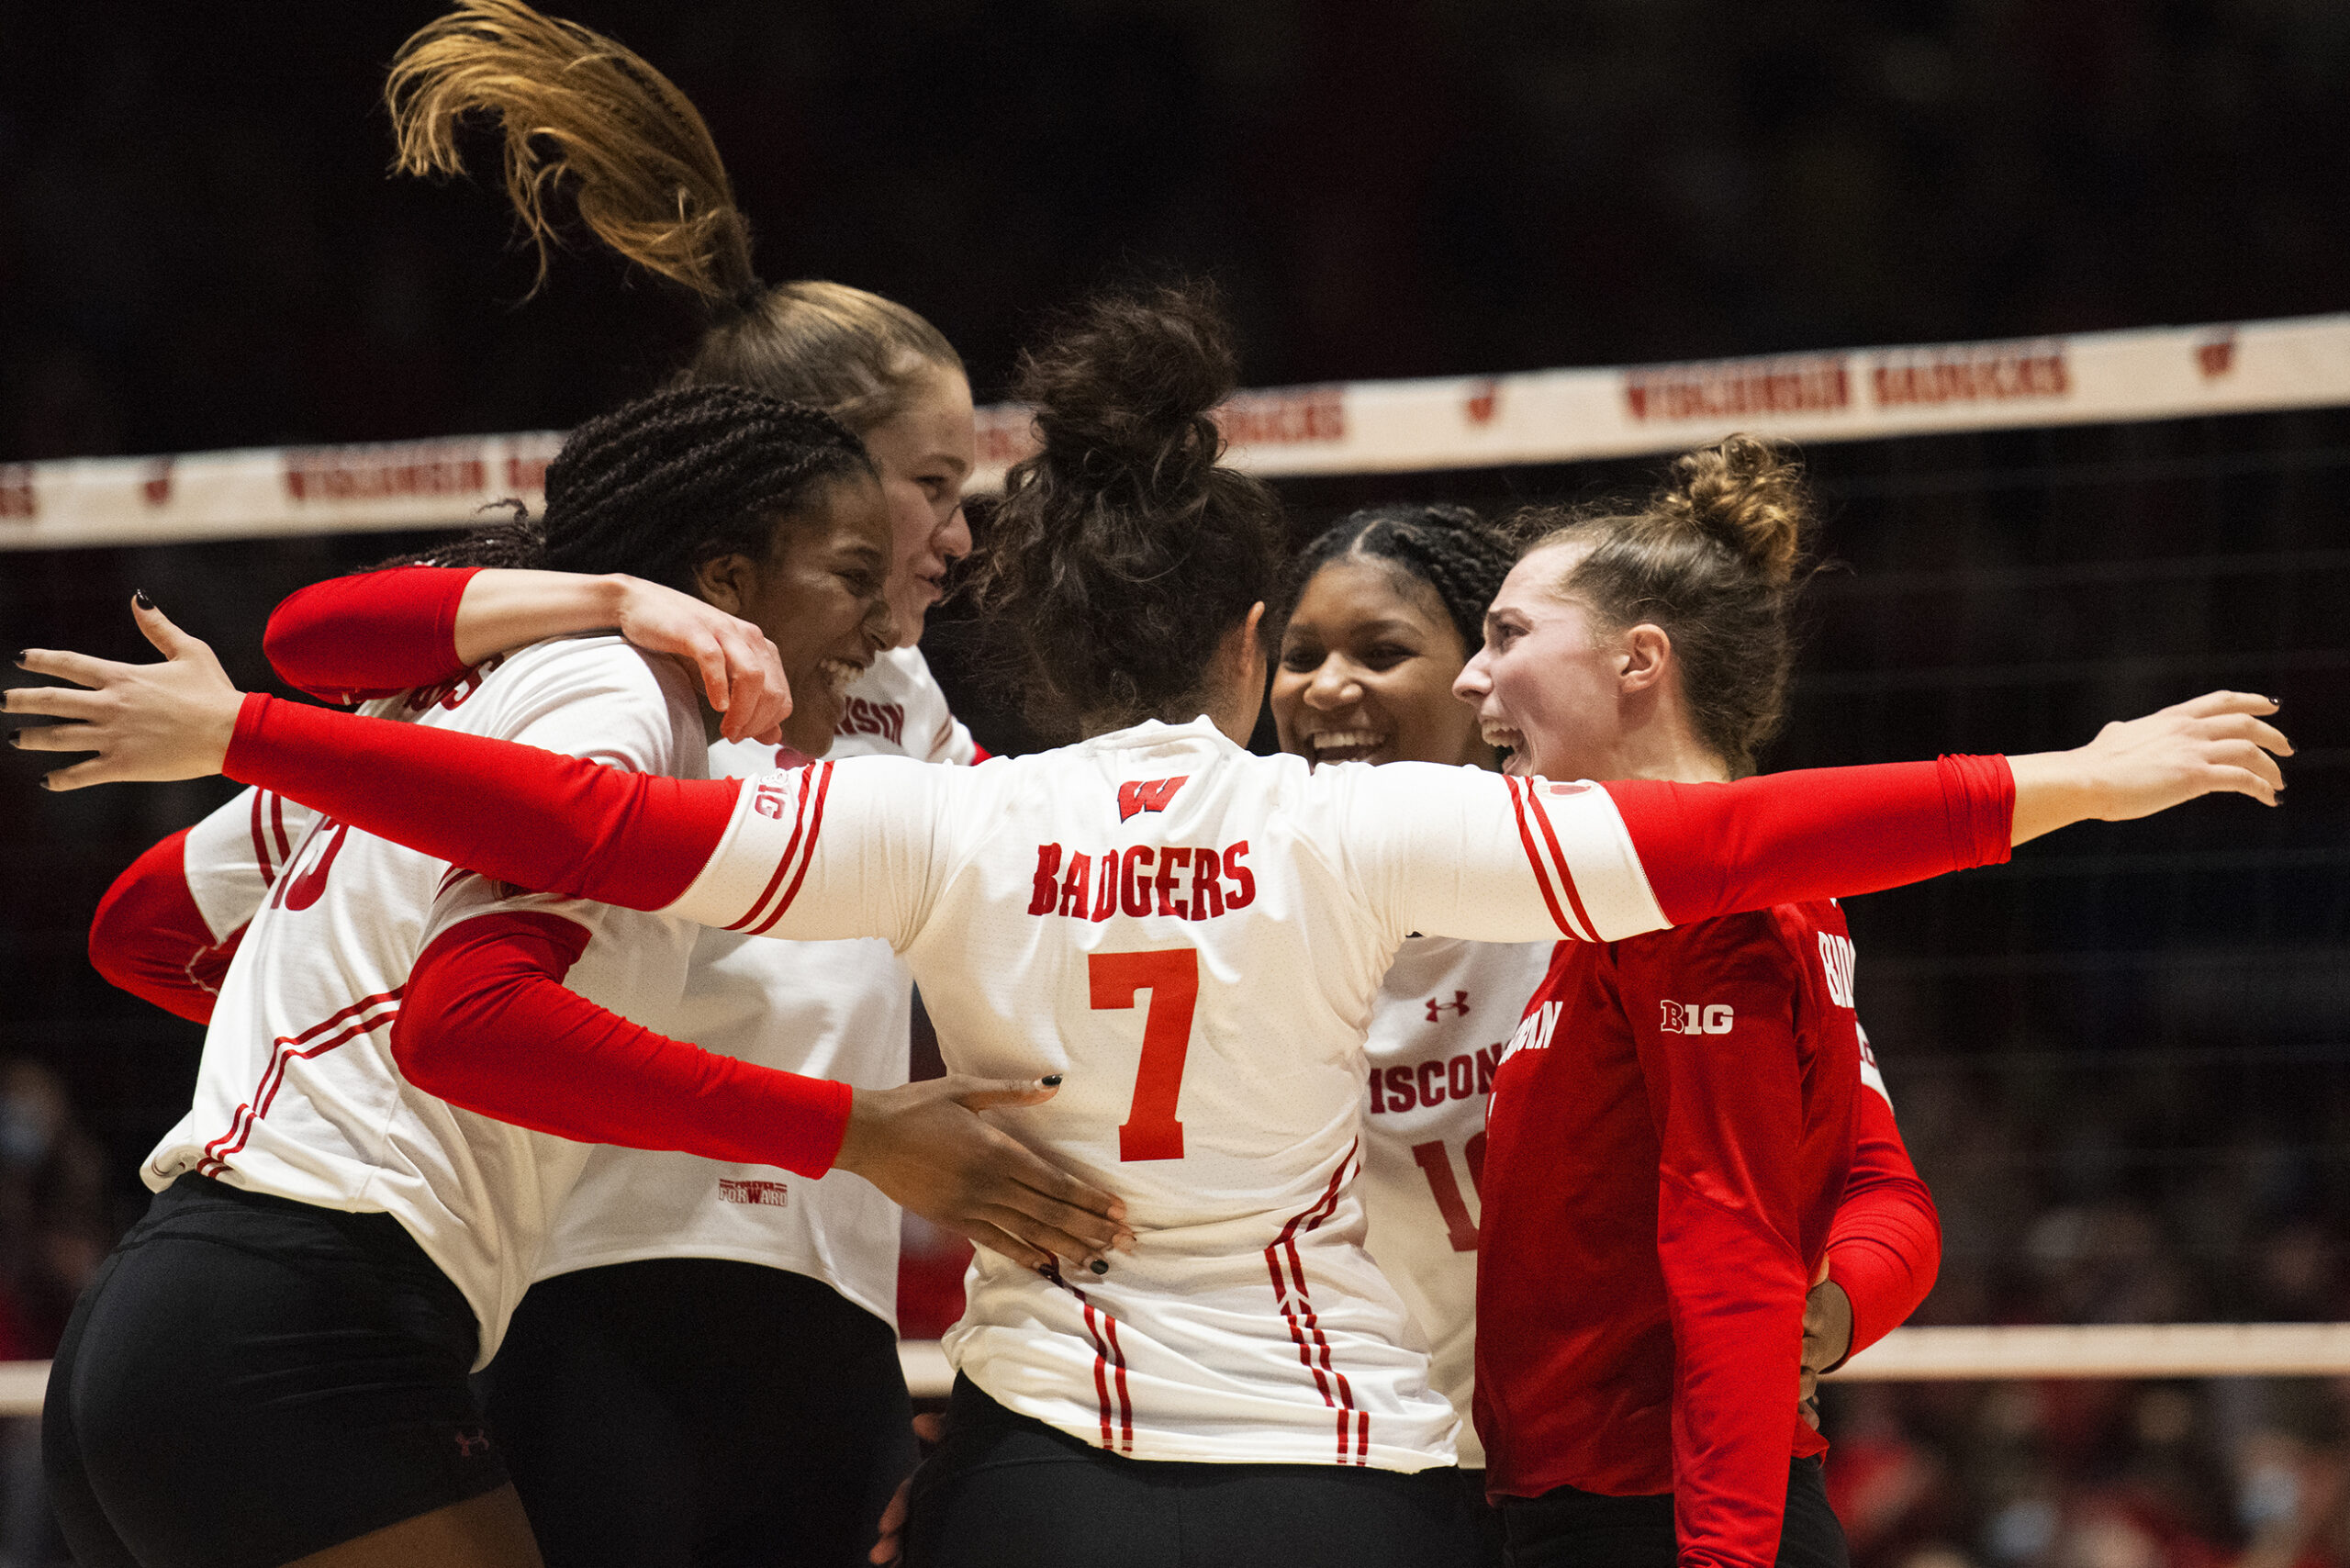 ‘Right now is gold’: Hilley, Rettke prepare for final NCAA tournament run with Badgers volleyball